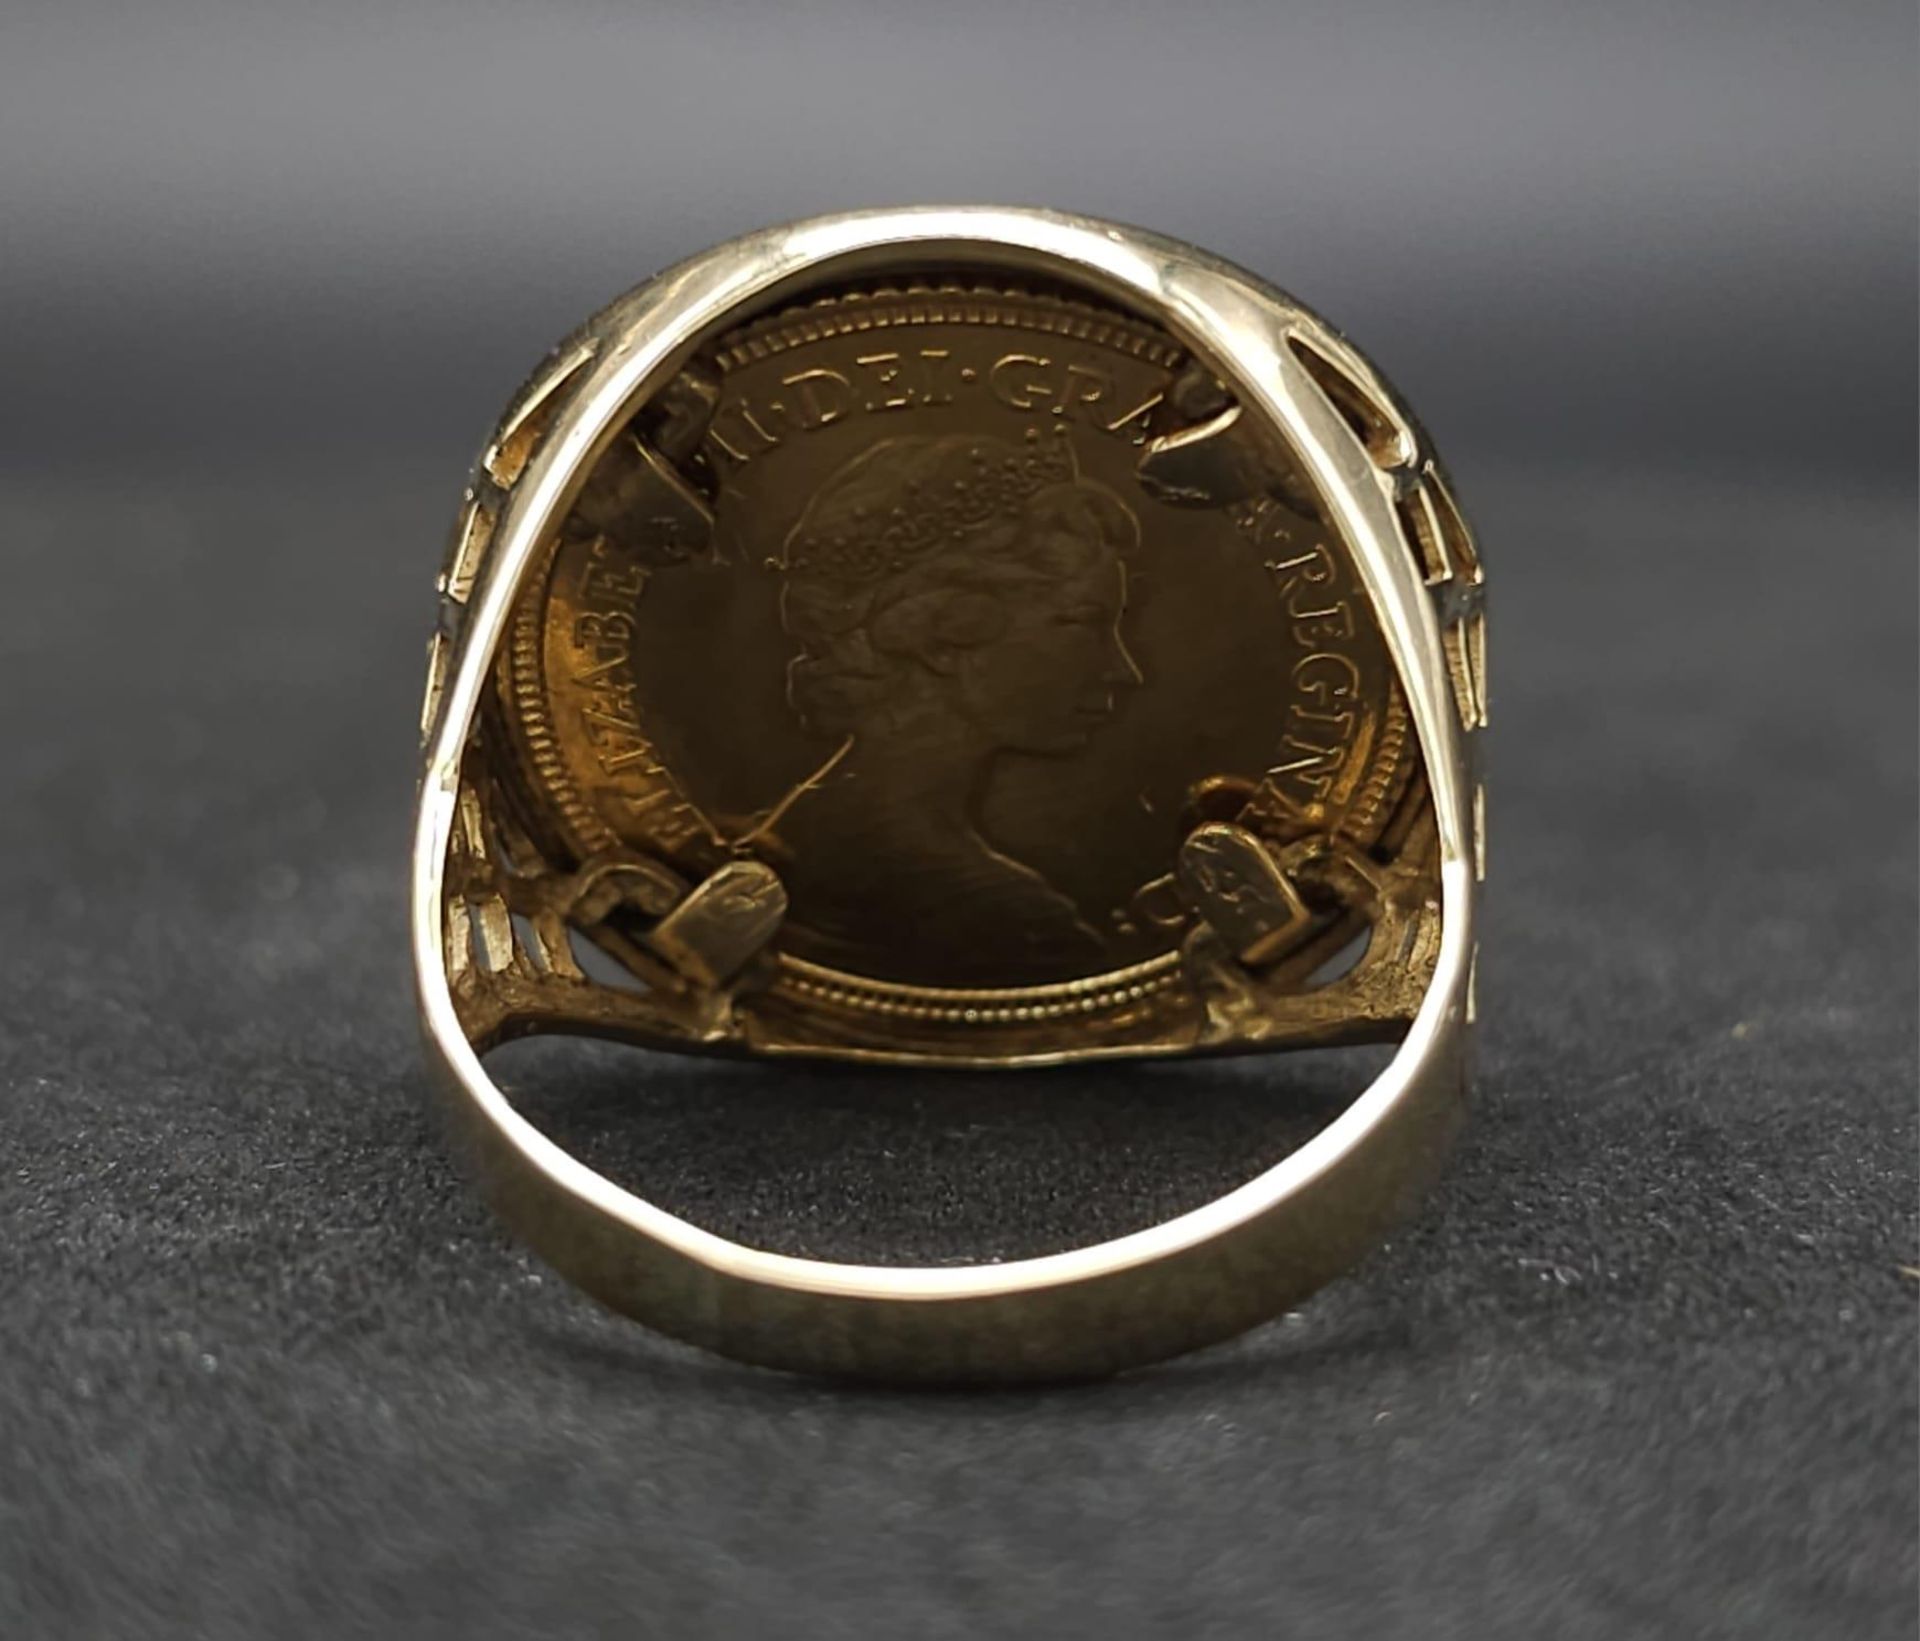 22k yellow gold half sovereign coin, dated 1982 with Queen Elizabeth, set into a 9k yellow gold ring - Bild 6 aus 8